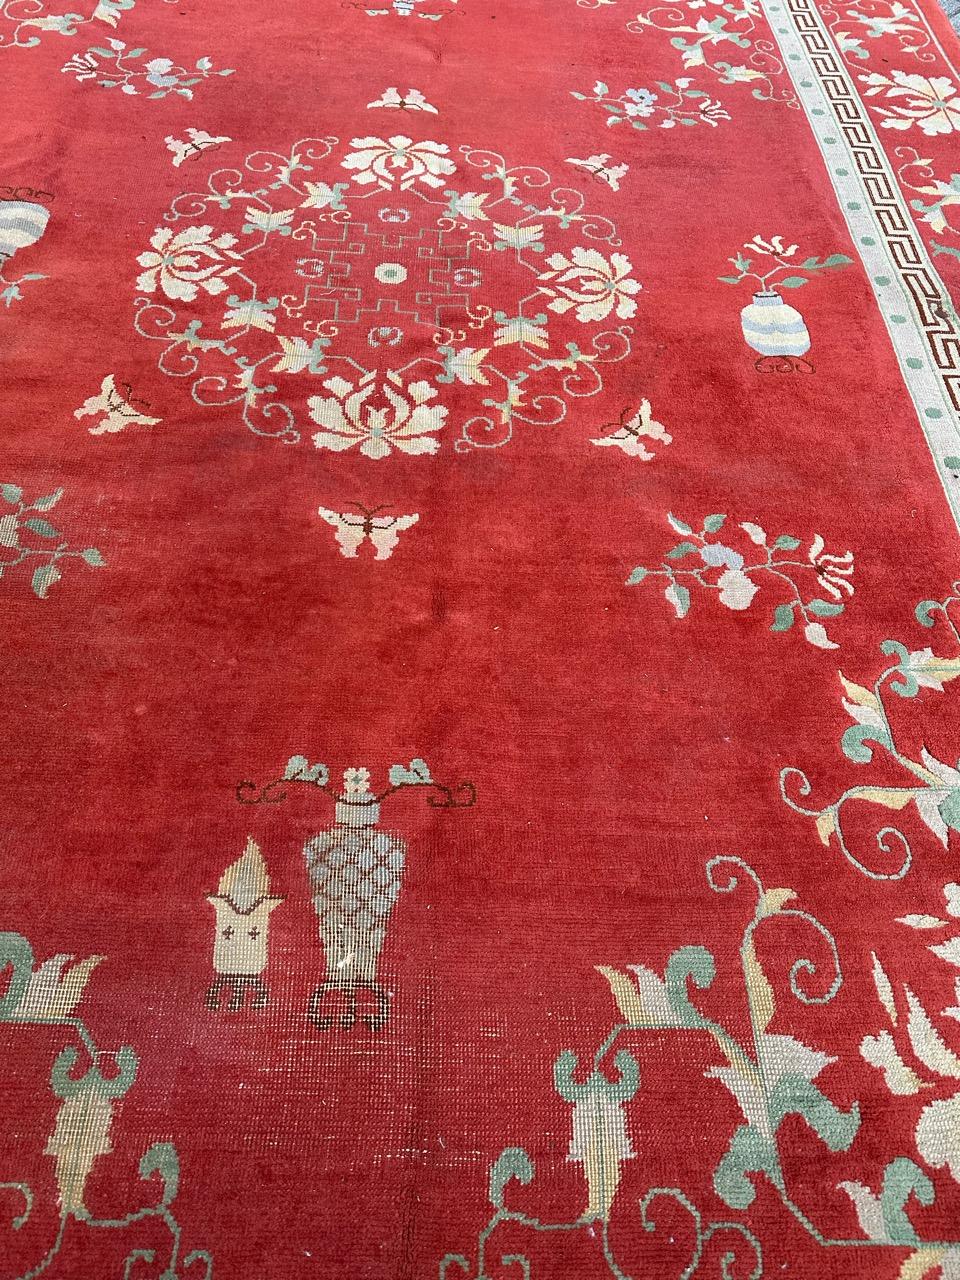 Beautiful large vintage Chinese rug from the mid-20th century, entirely hand-knotted in wool on a cotton foundation. Art Deco-inspired design featuring a red background with a medallion adorned with stylized flowers and branches in white and light